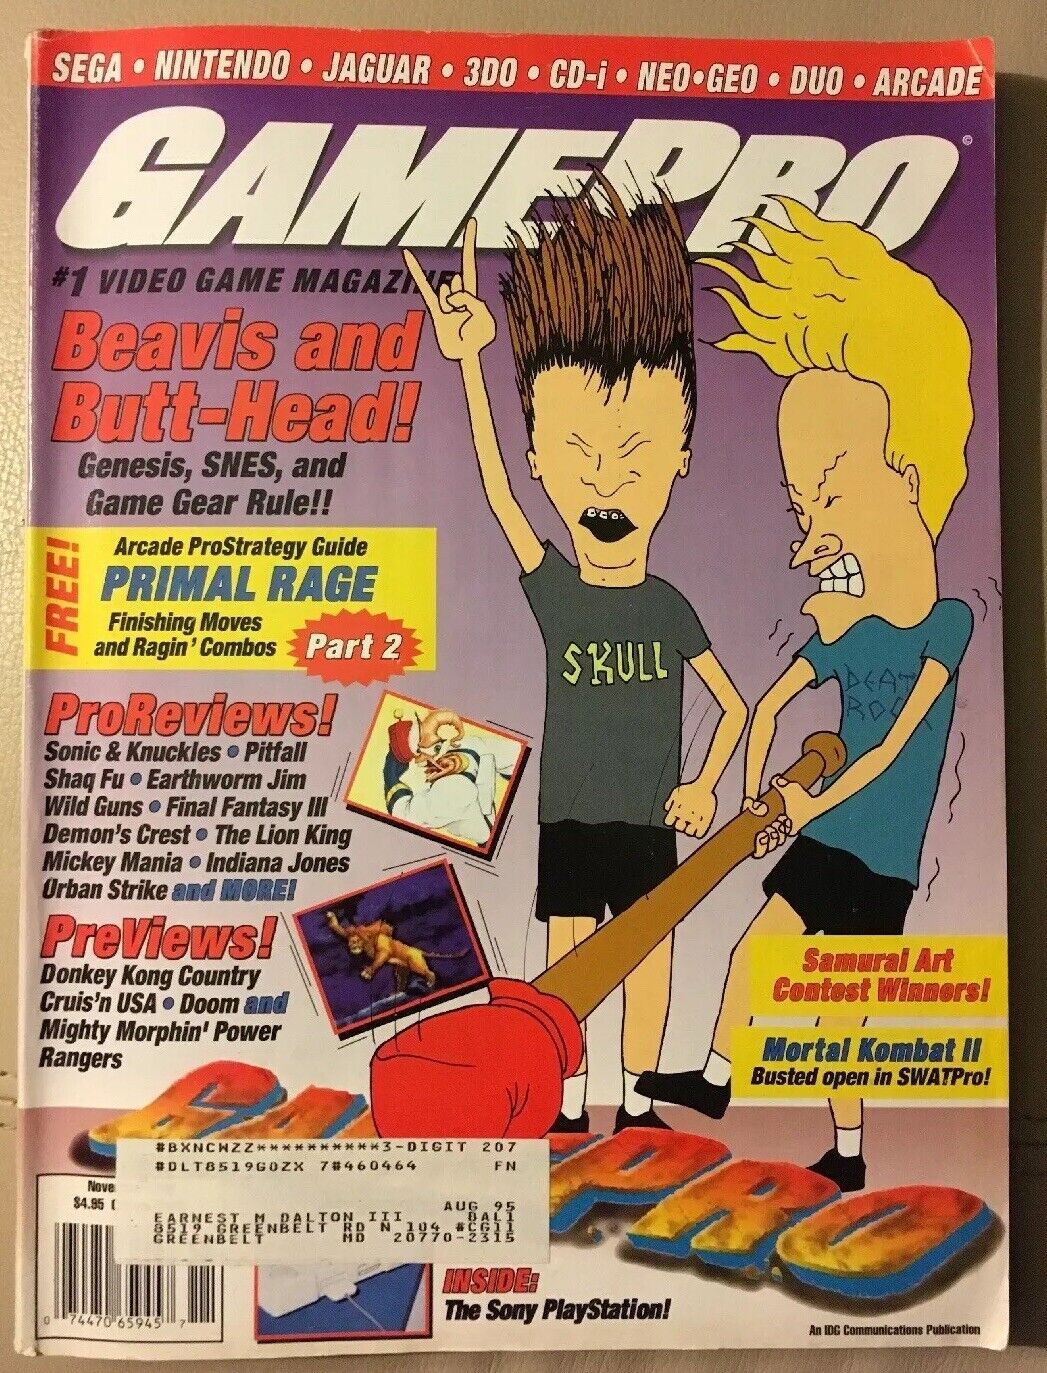 Collector Issue GAMEPRO Magazine 74 Vol 6 #11 Nov 1994 Beavis and Butthead